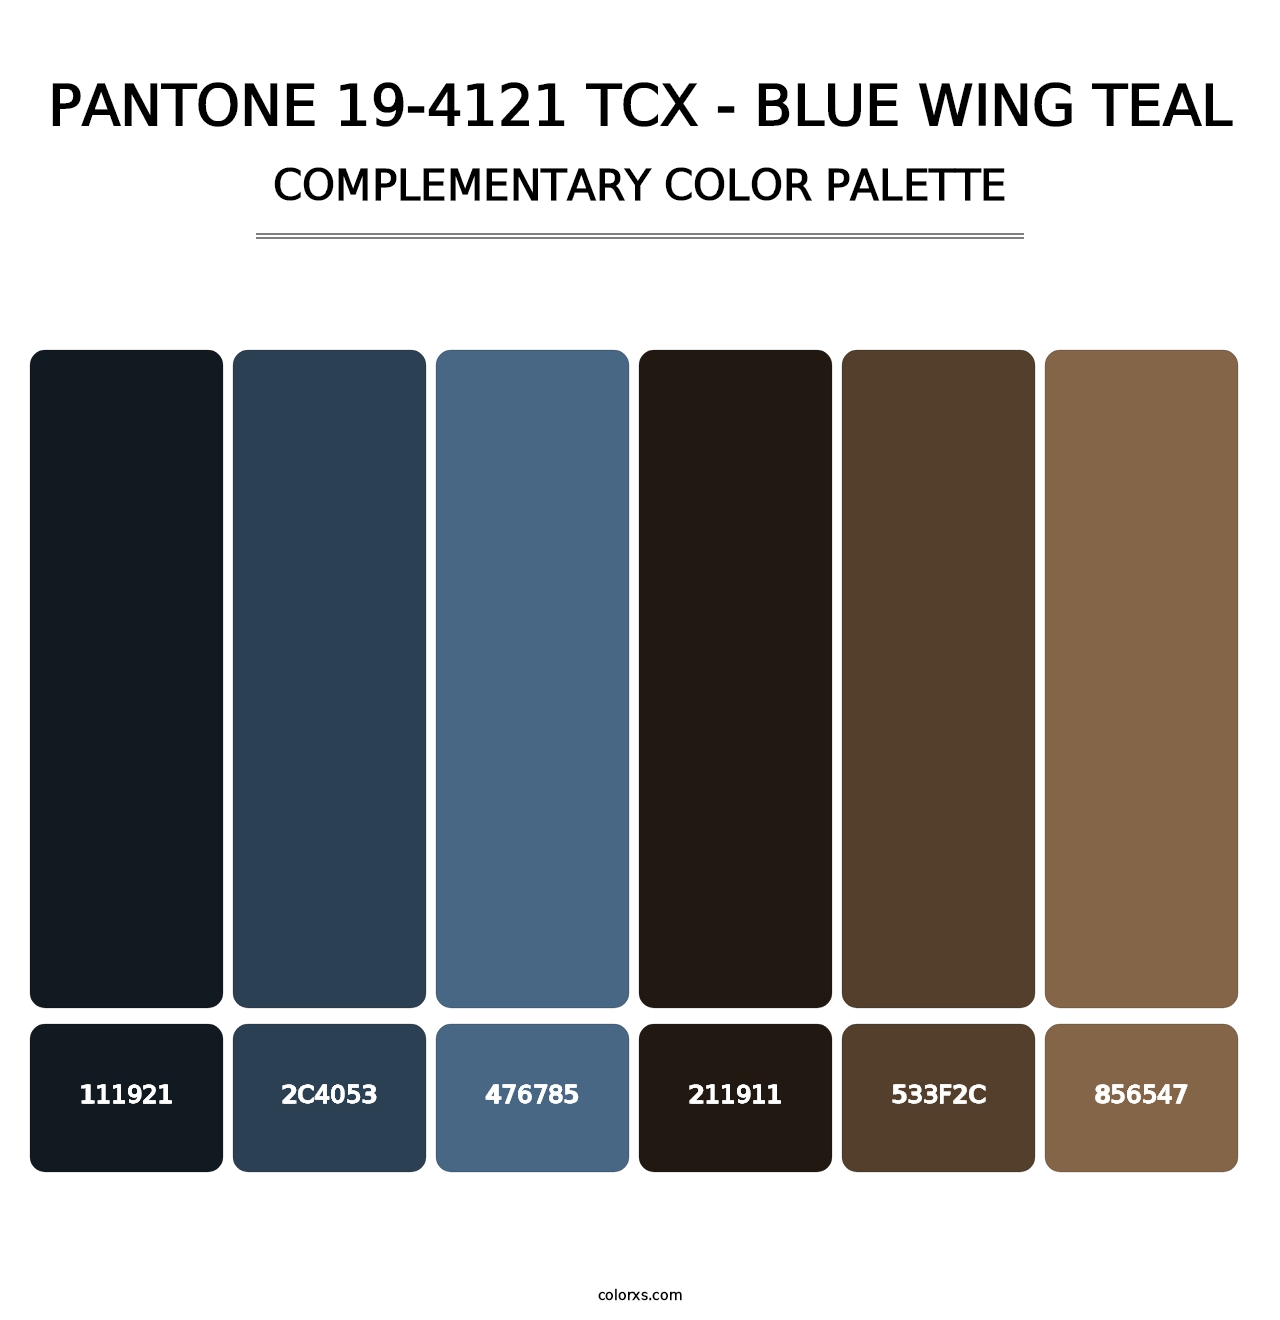 PANTONE 19-4121 TCX - Blue Wing Teal - Complementary Color Palette